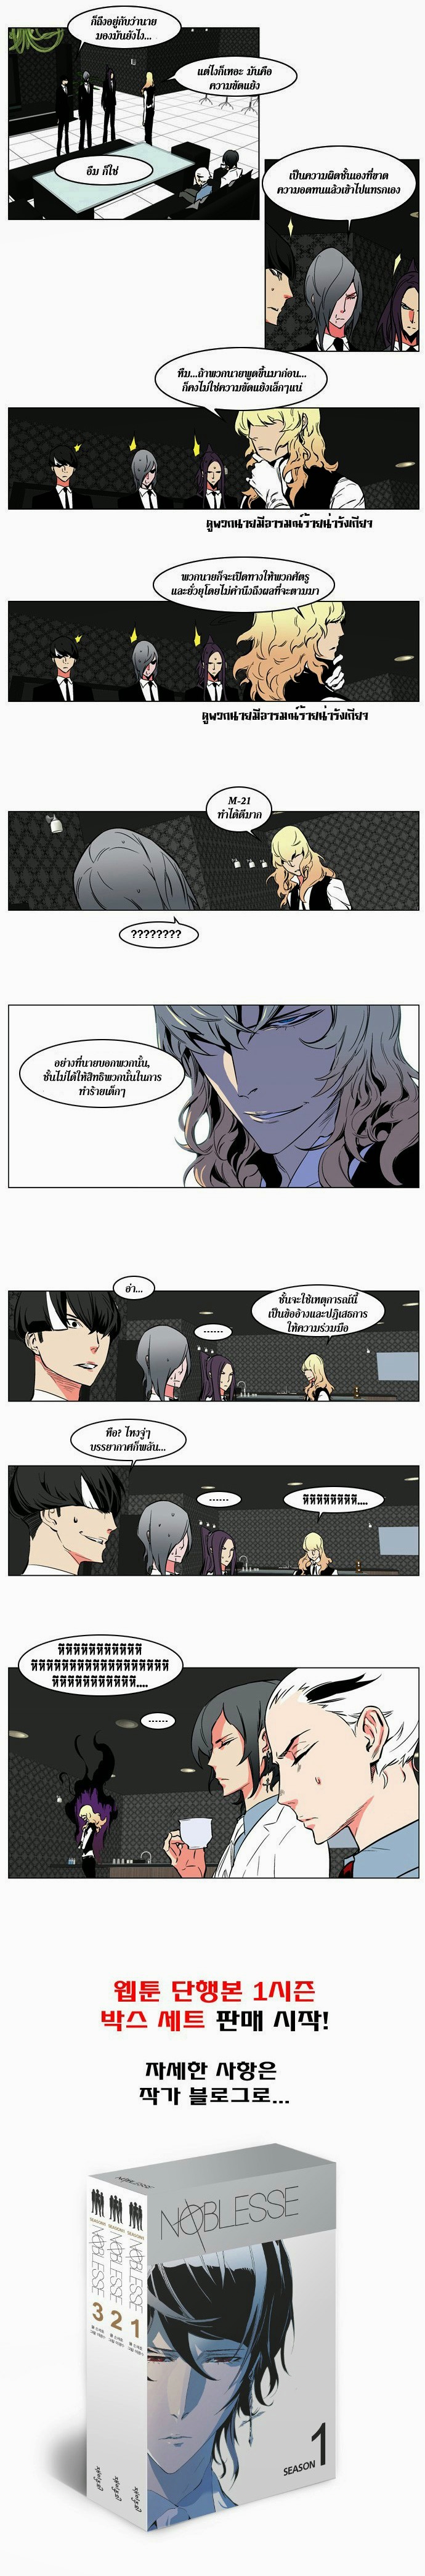 Noblesse 209 010